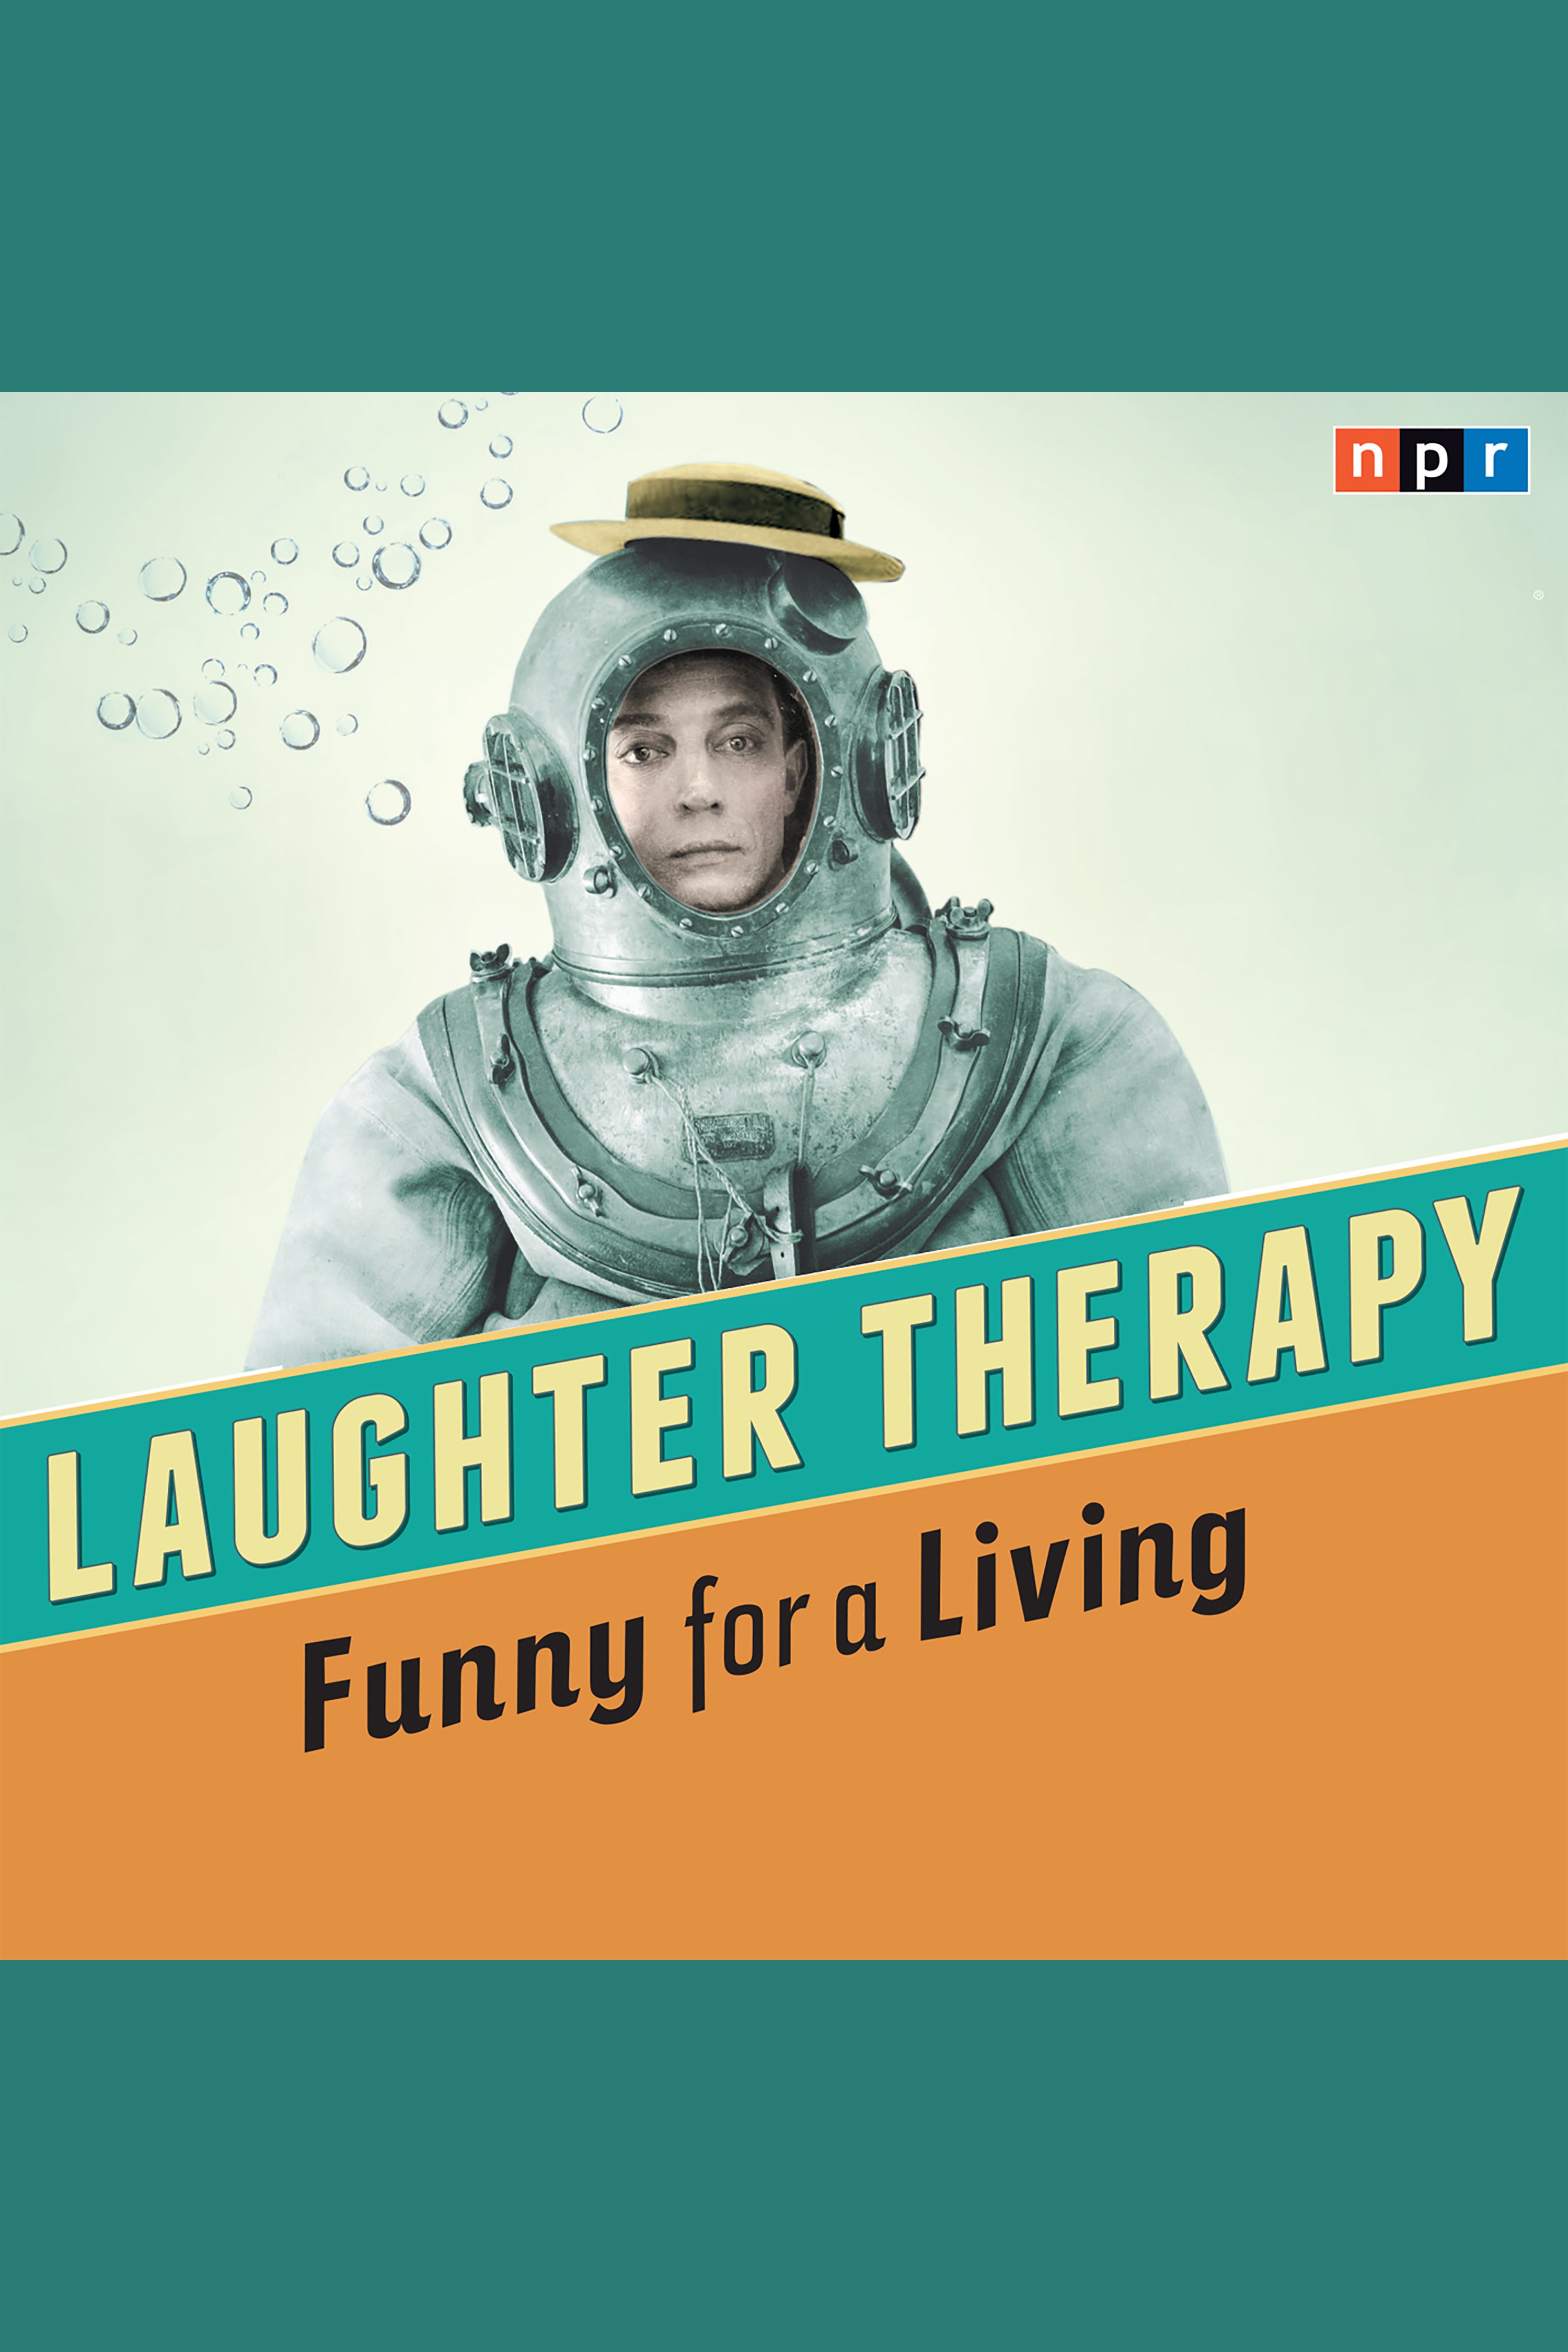 Laughter therapy funny for a living cover image